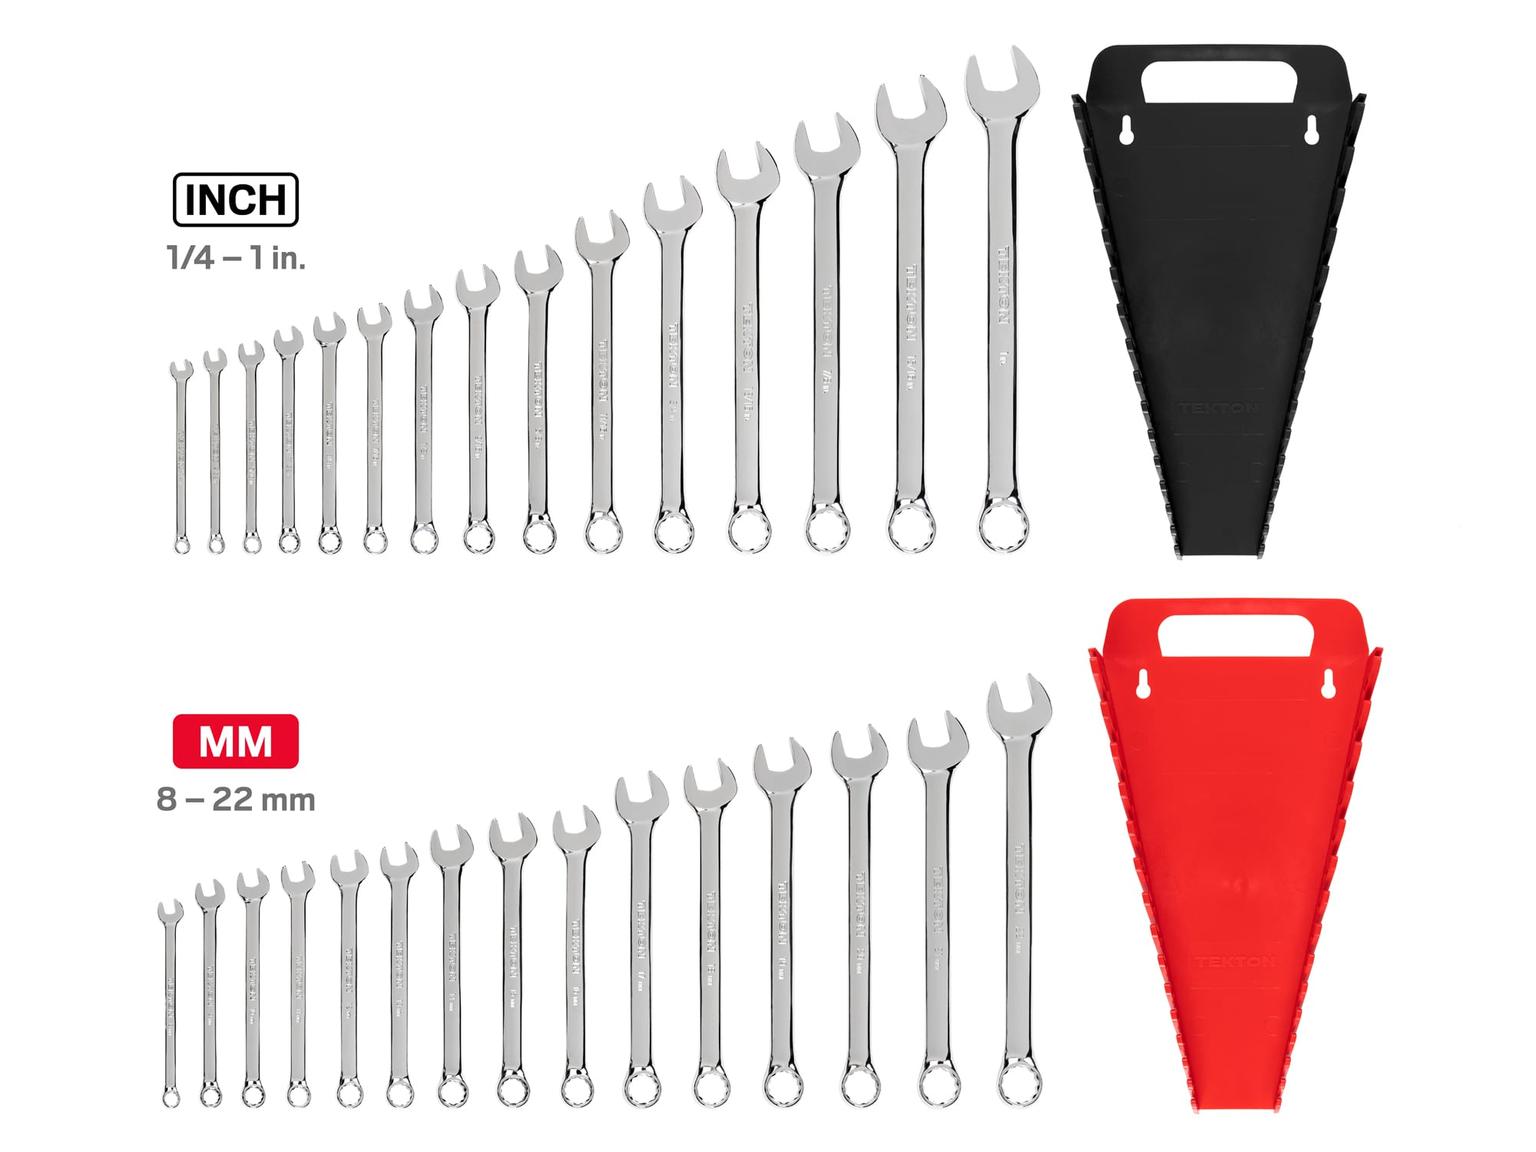 TEKTON 90191-T Combination Wrench Set with Holder, 30-Piece (1/4 - 1 in., 8 - 22 mm)